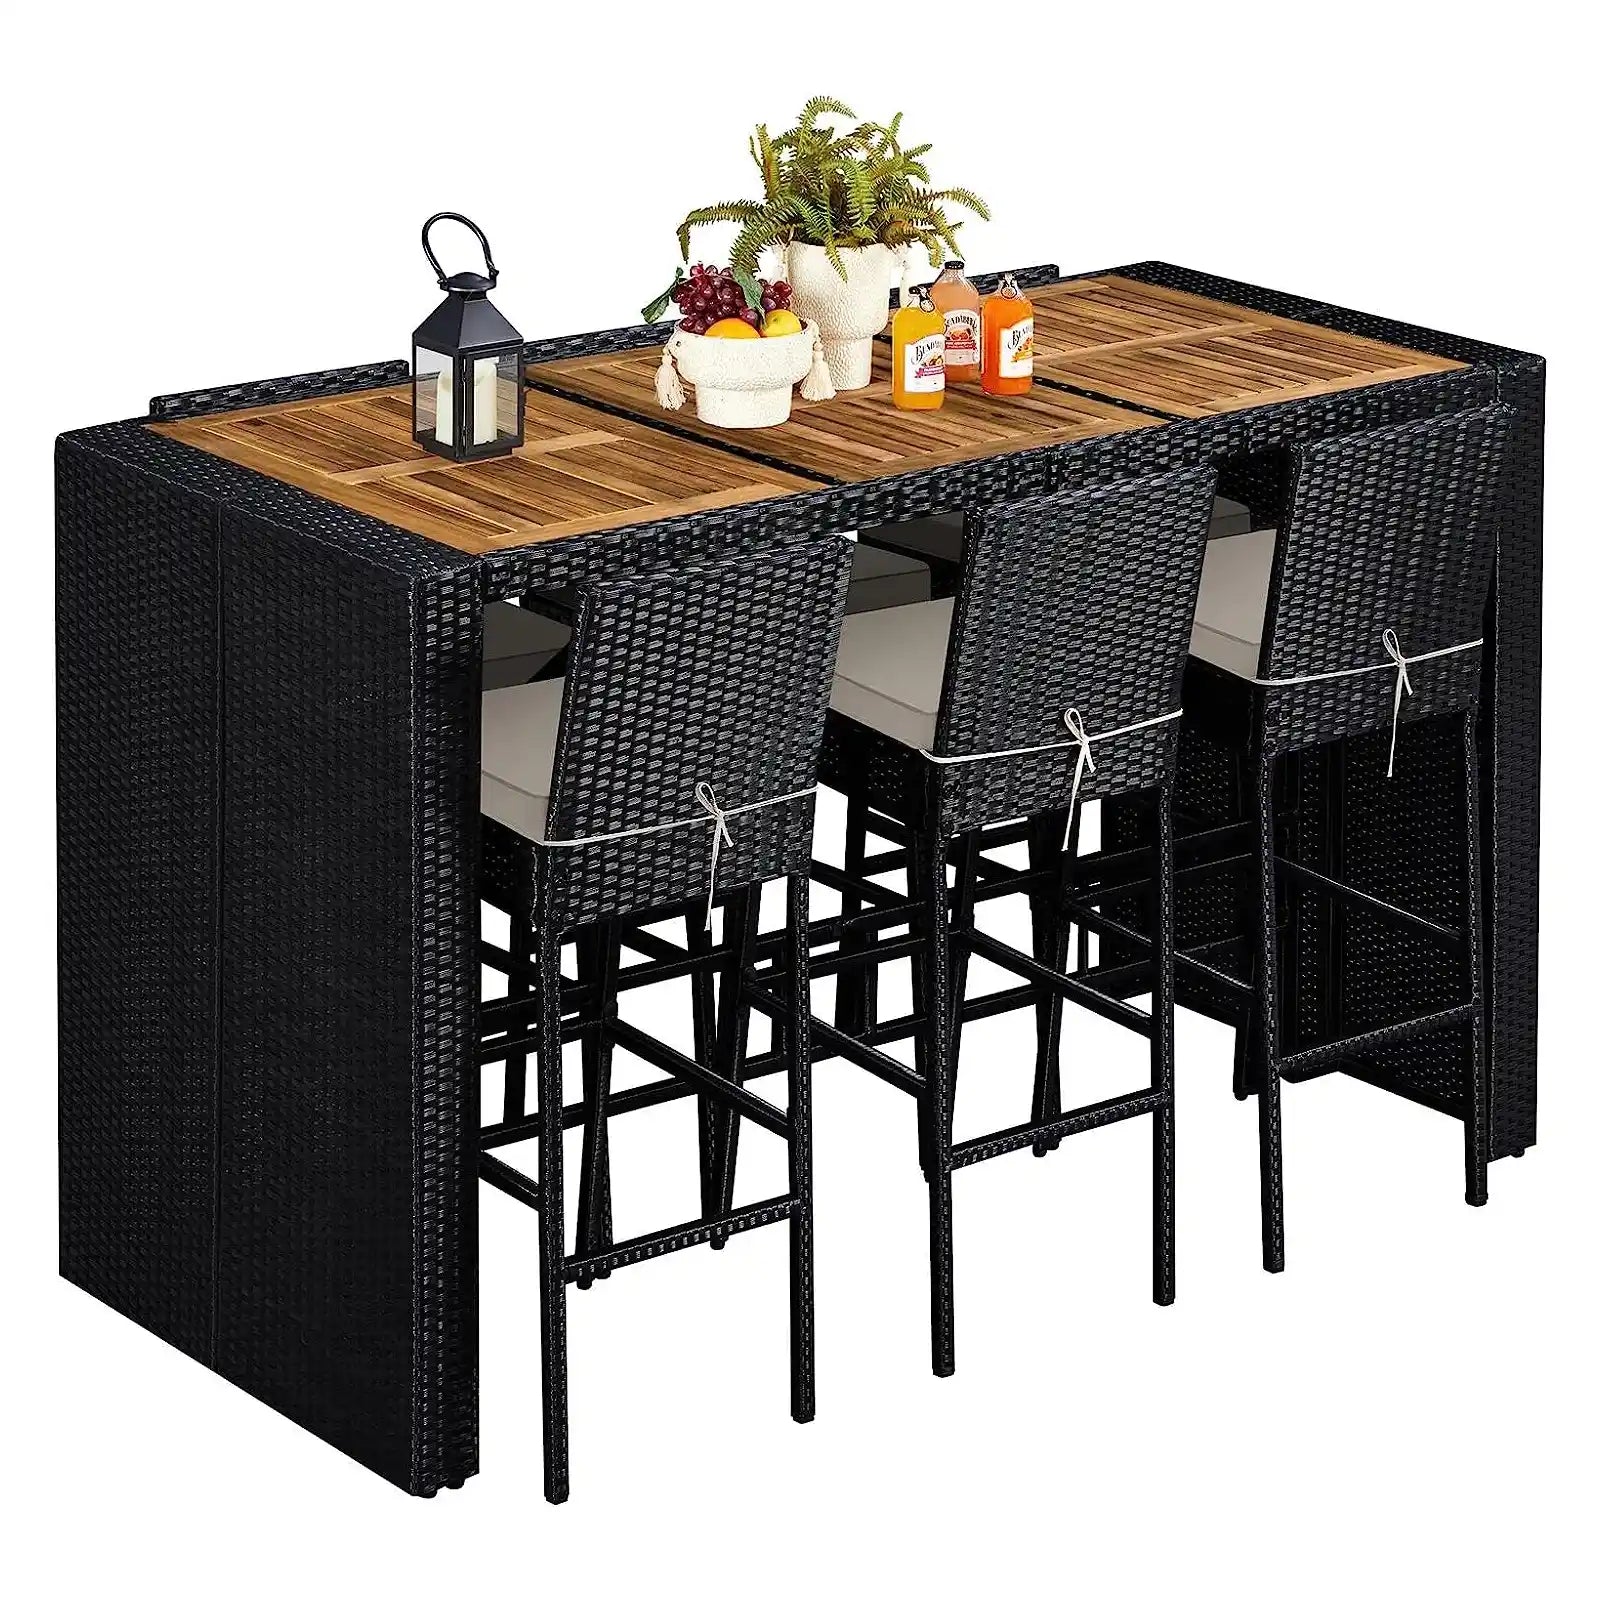 7 Piece Patio Dining Set Outdoor Acacia Wood Bar Table and Barstool Chairs with Removable Cushions, Patio Wicker Furniture Set for Deck, Backyard, Garden